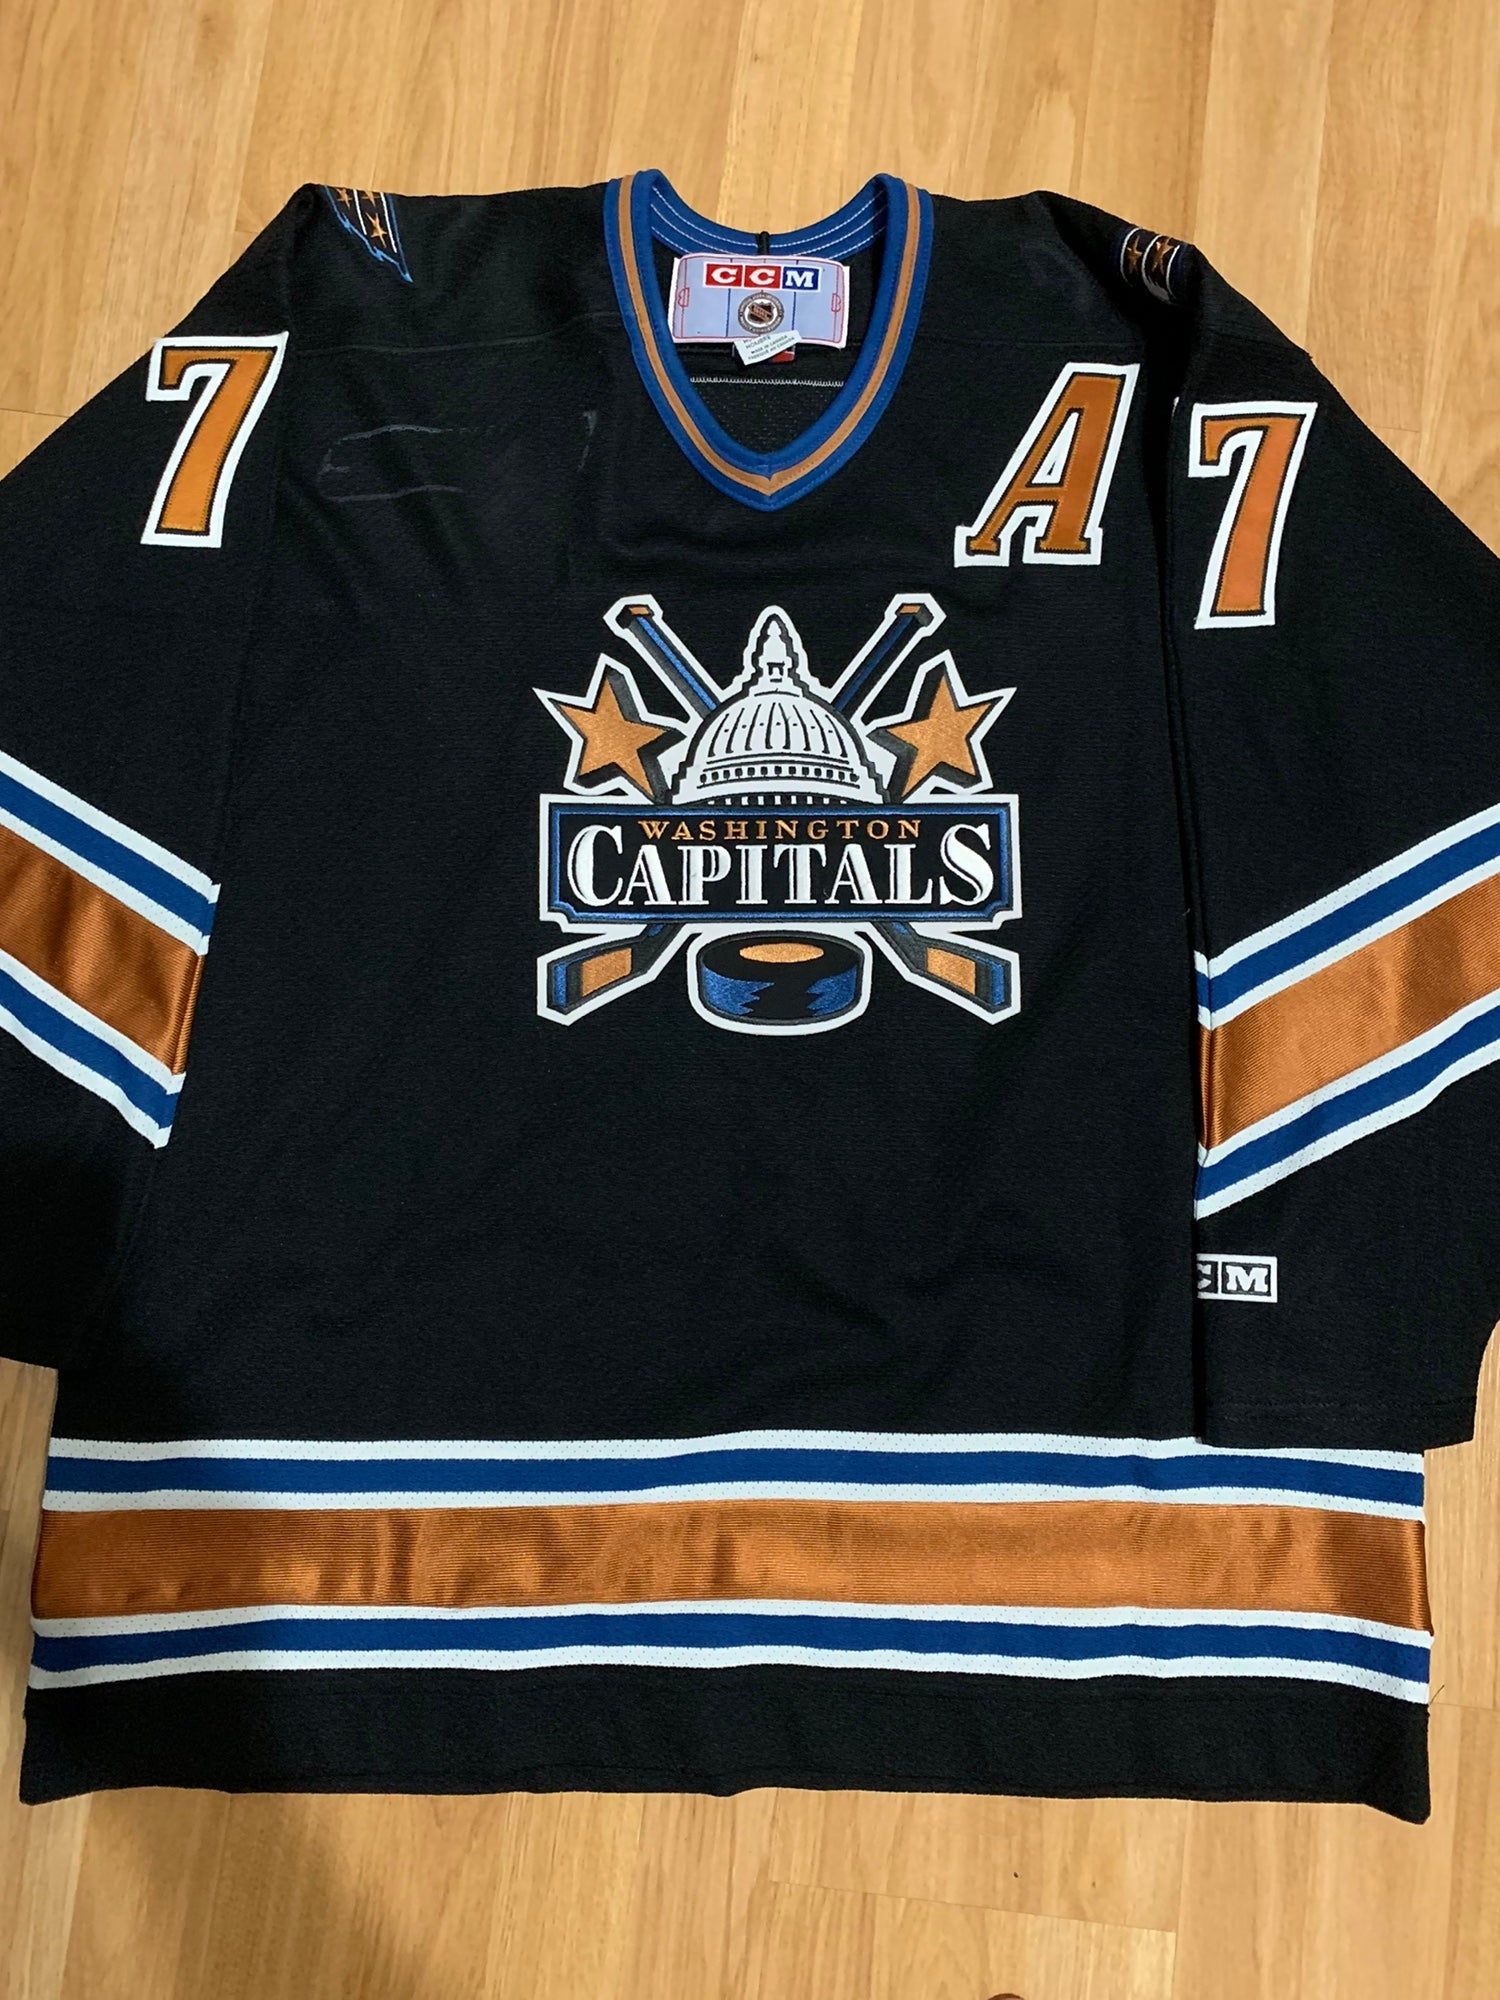 Washington Capitals: New retro jersey is worth wearing proudly in 2021